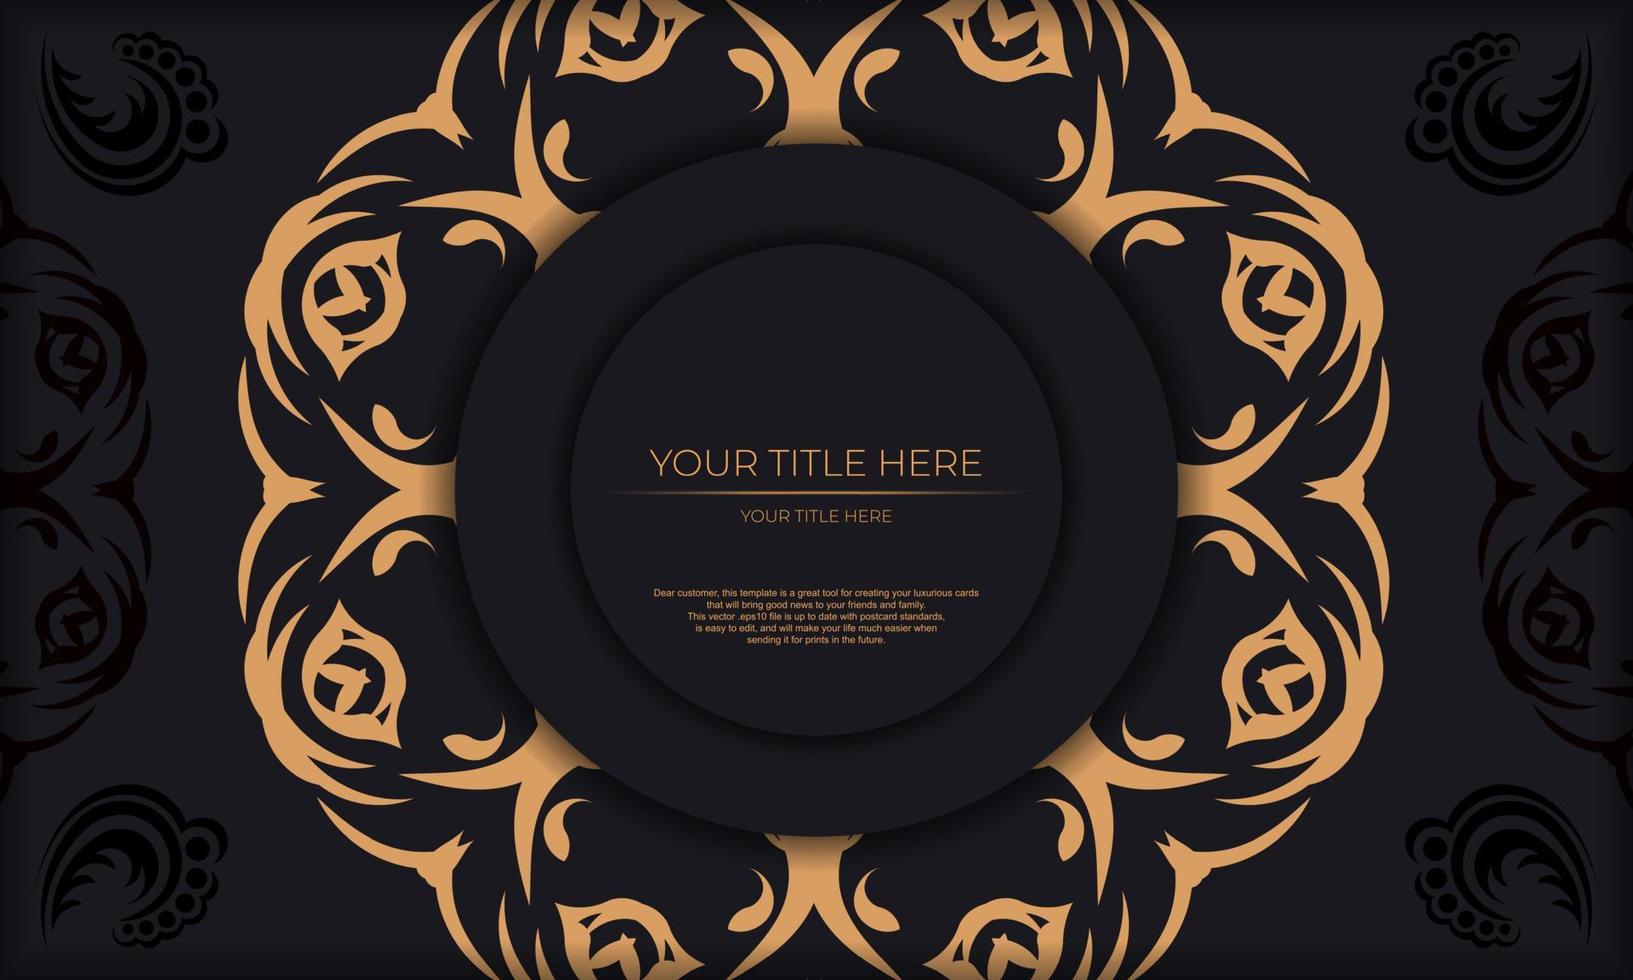 Black template banner with abstract ornaments and place for your design. Invitation card design with vintage patterns. vector